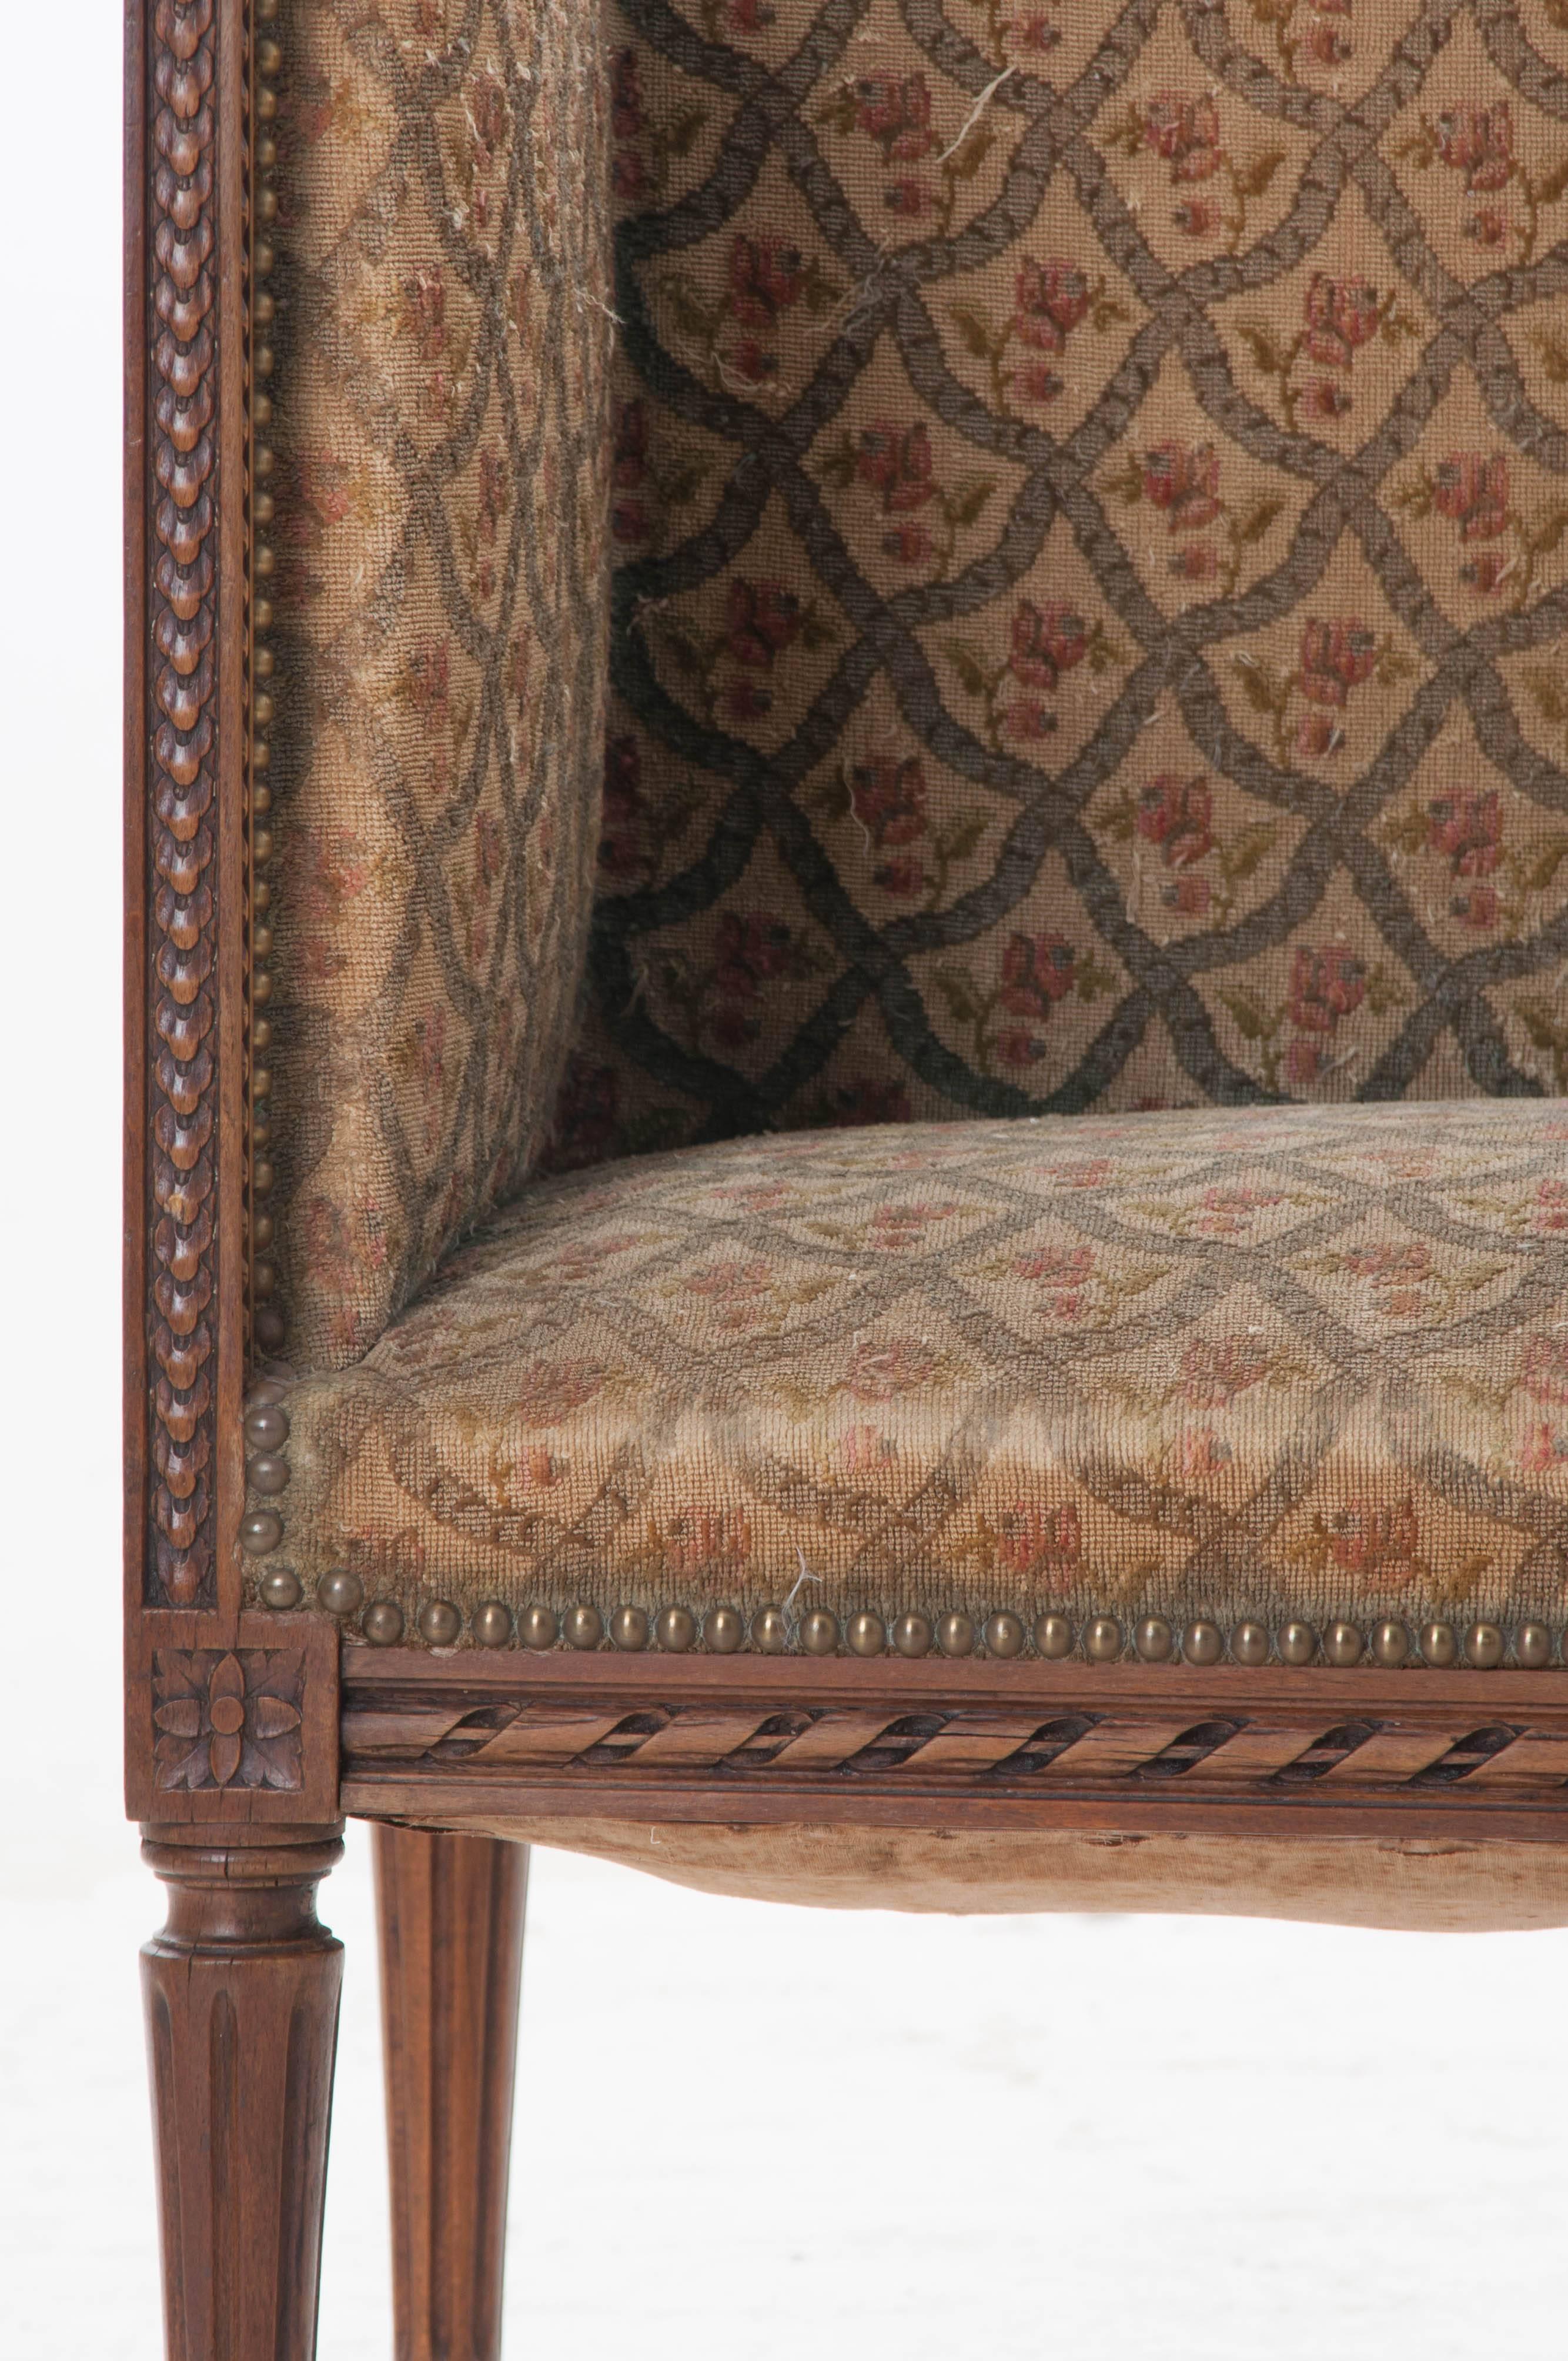 A wonderfully sized Louis XVI period walnut settee from 18th century, France. This exceptional piece has an unusual, high, straight back and sides that give it a distinct style that is impossible not to fall in love with. The walnut frame boasts